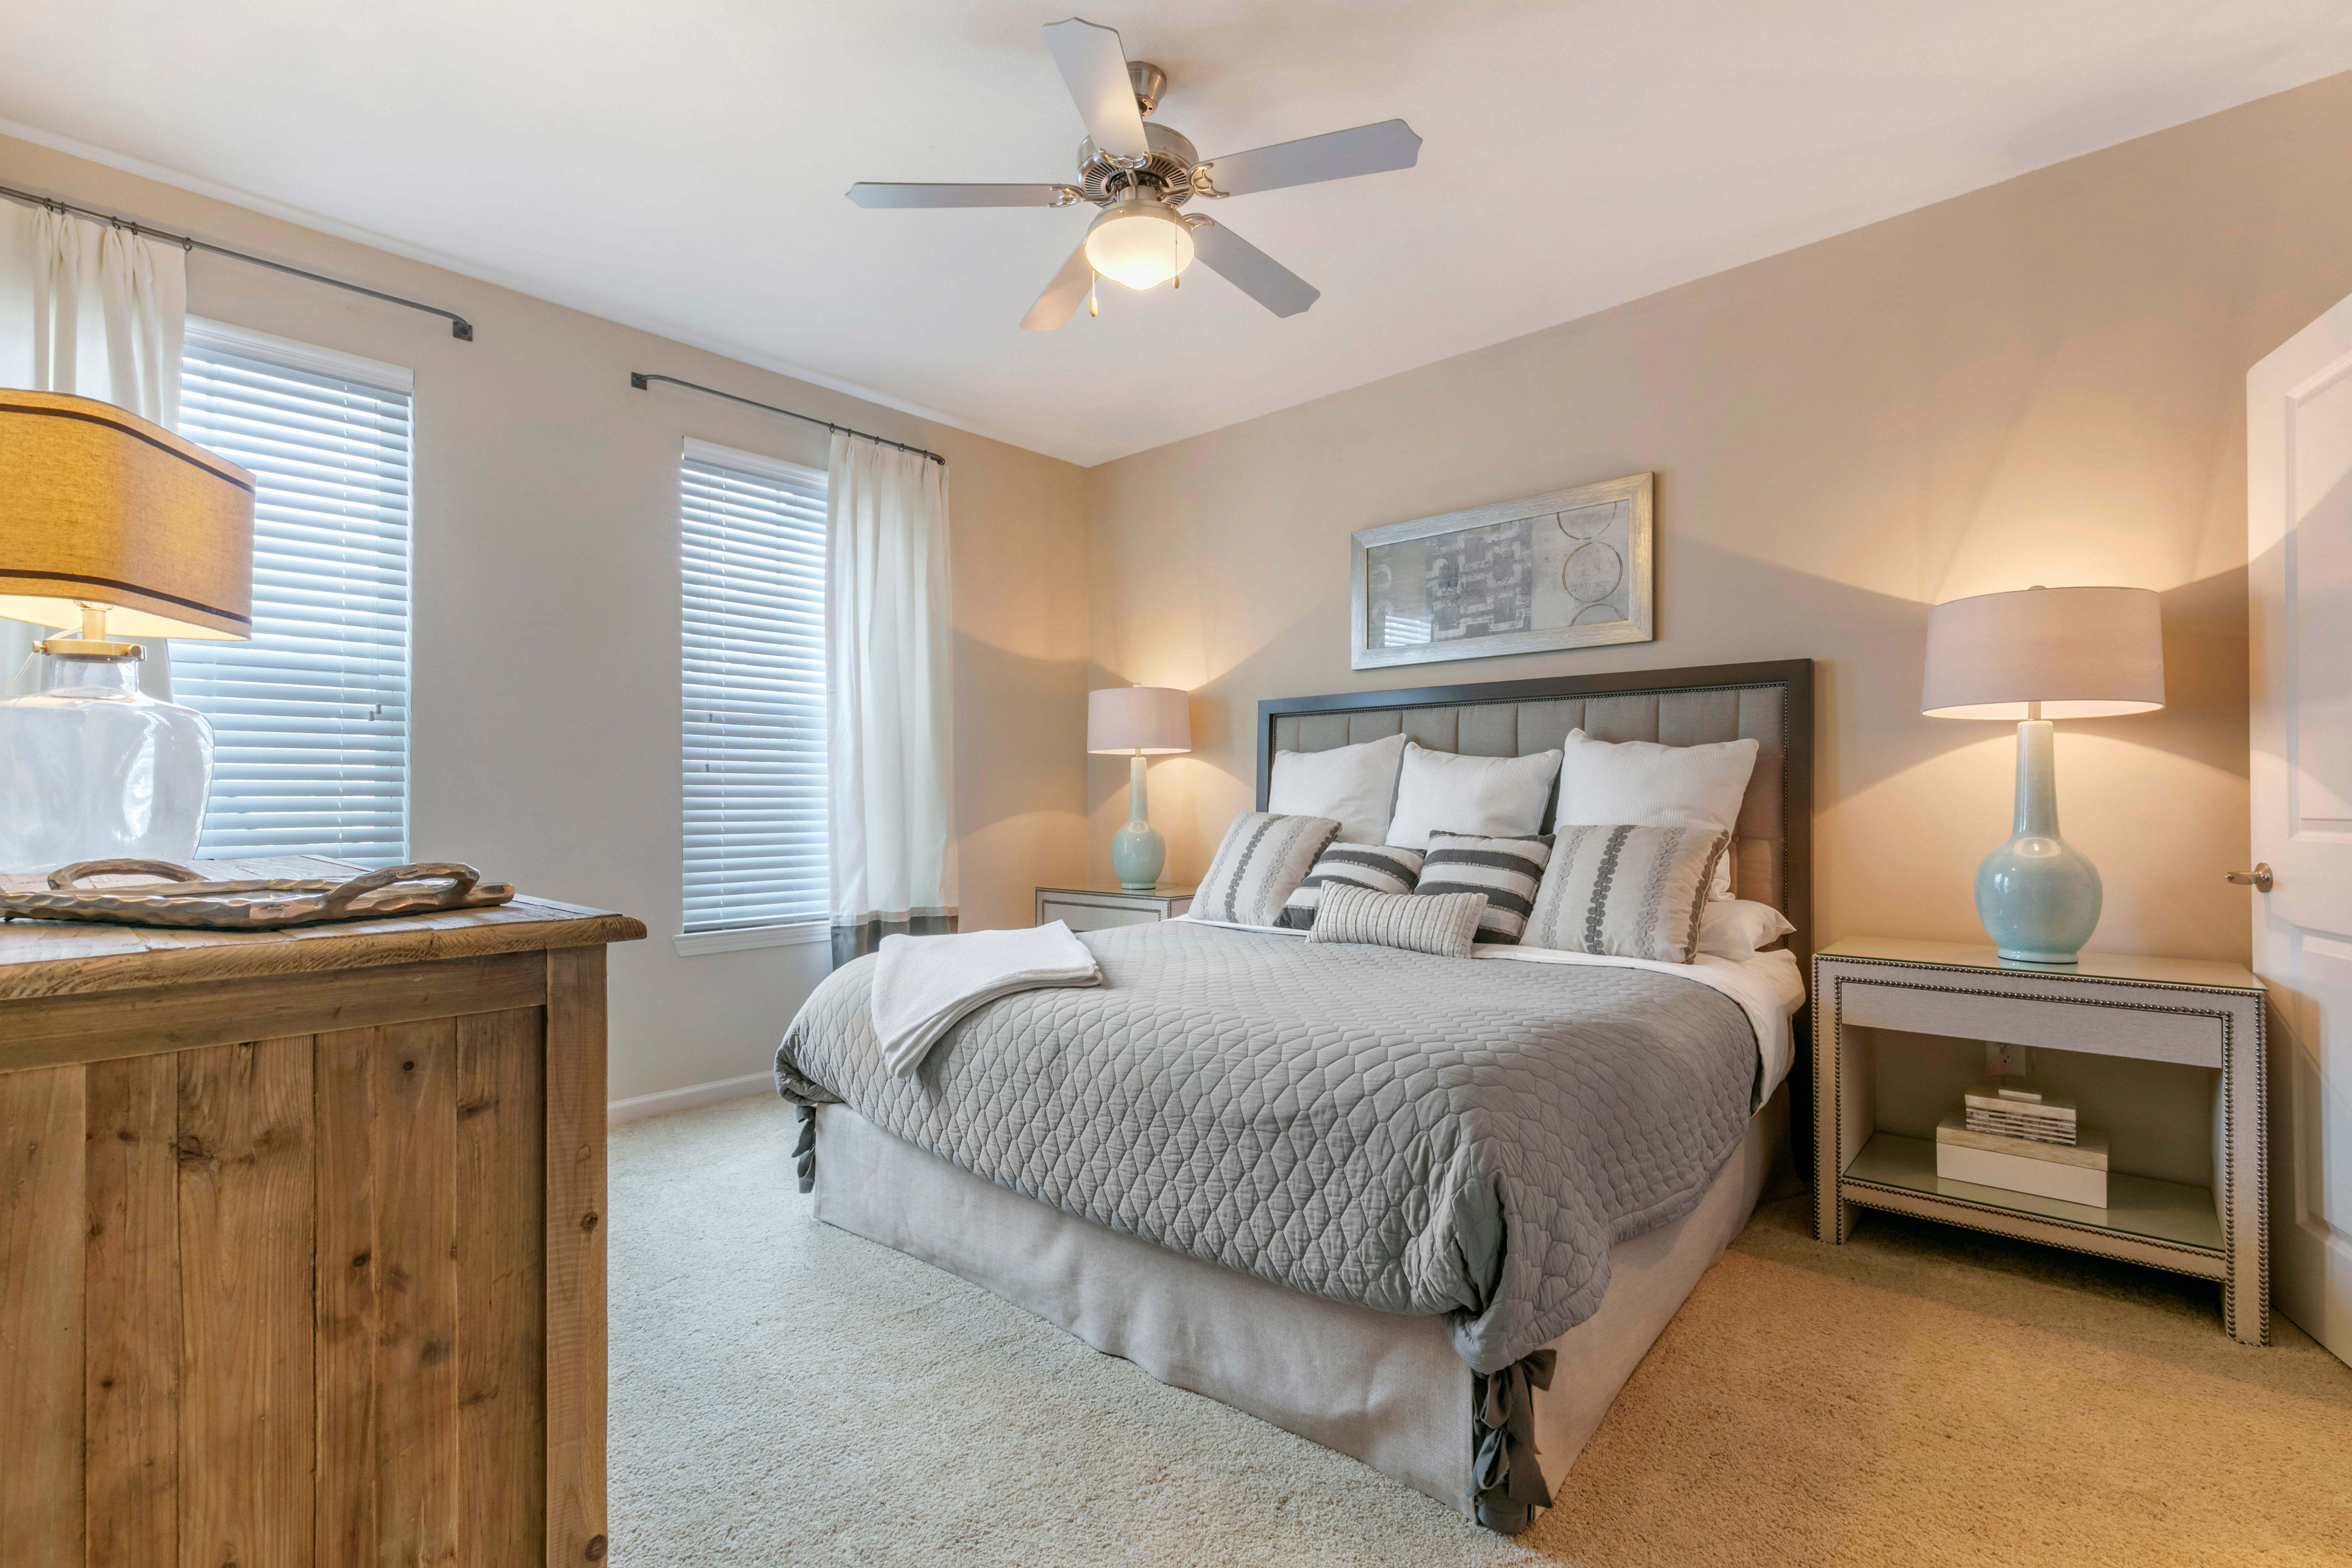 Model bedroom with a ceiling fan and plush carpeting at The Village at Apison Pike in Ooltewah, Tennessee